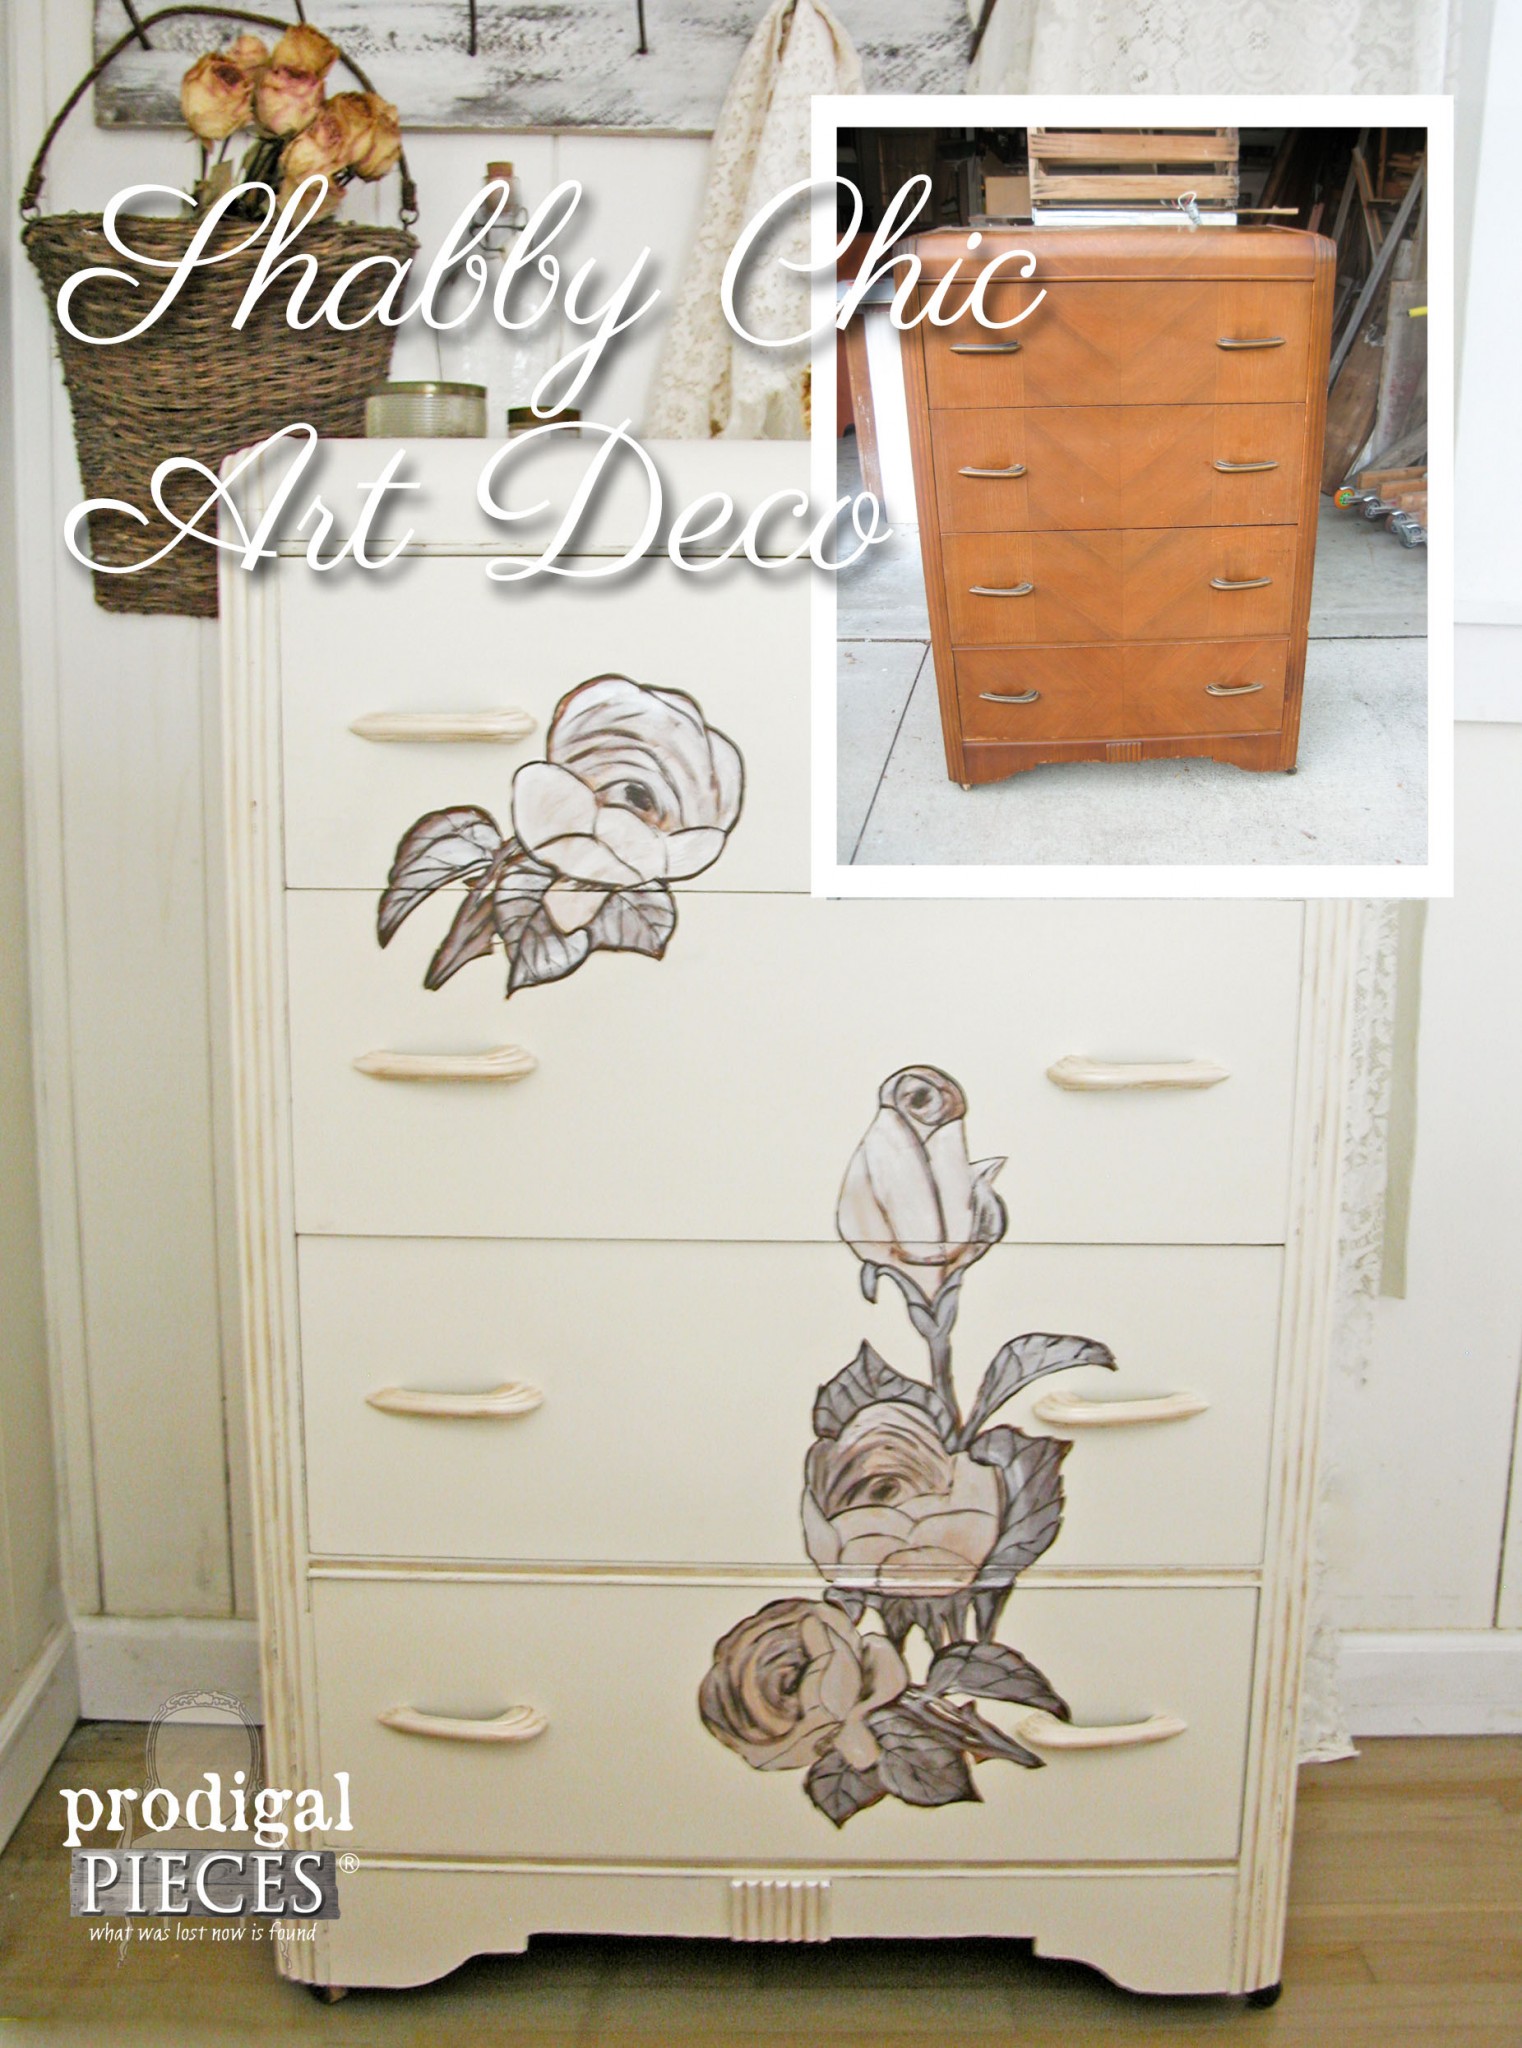 Adding Shabby Chic Details to Art Deco Chest of Drawers | Prodigal Pieces | www.prodigalpieces.com